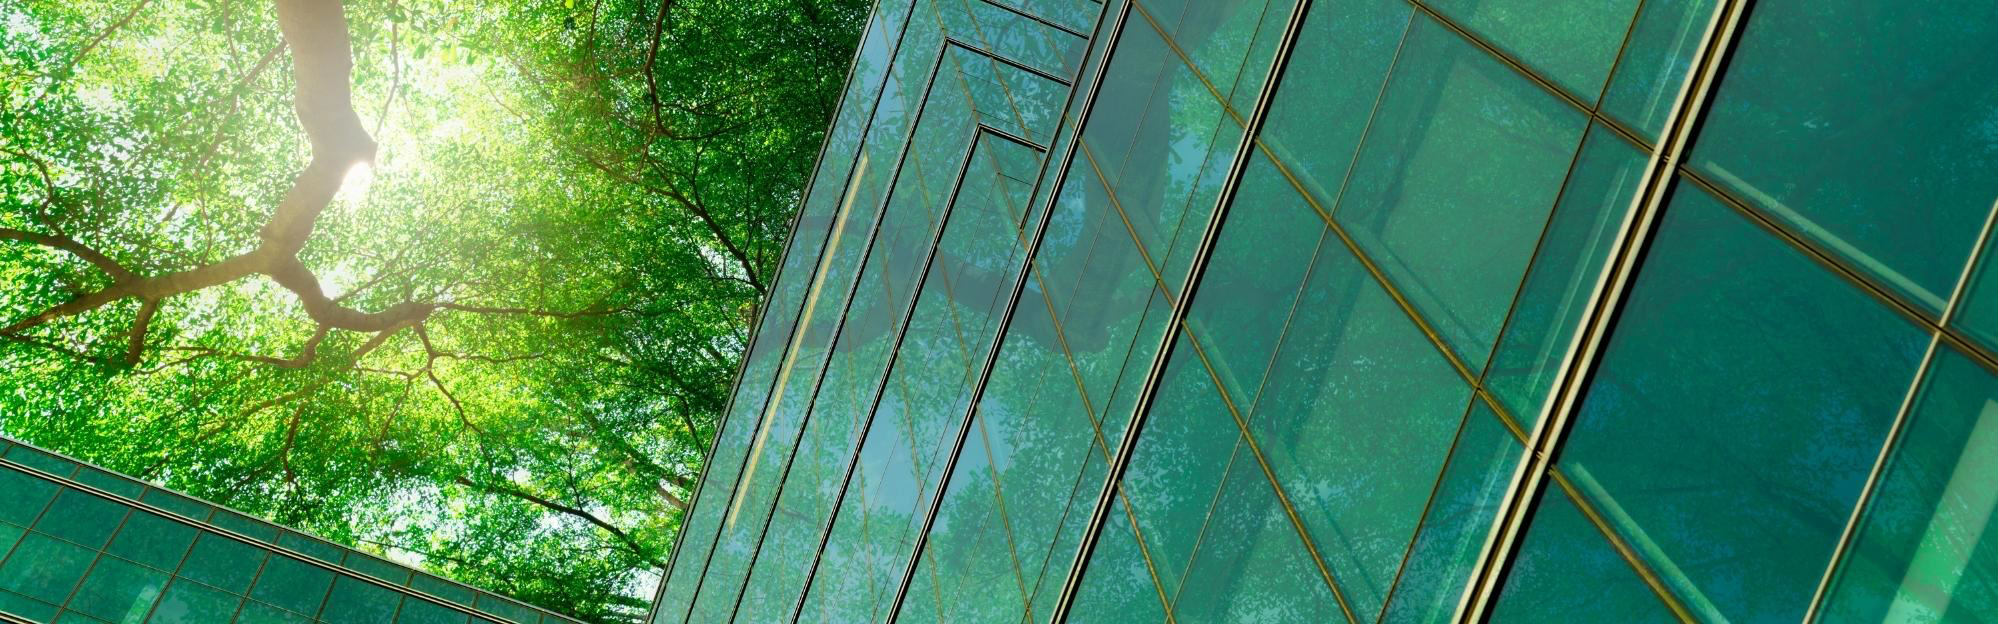 Sunlight shining through the tree canopy onto a glass building.